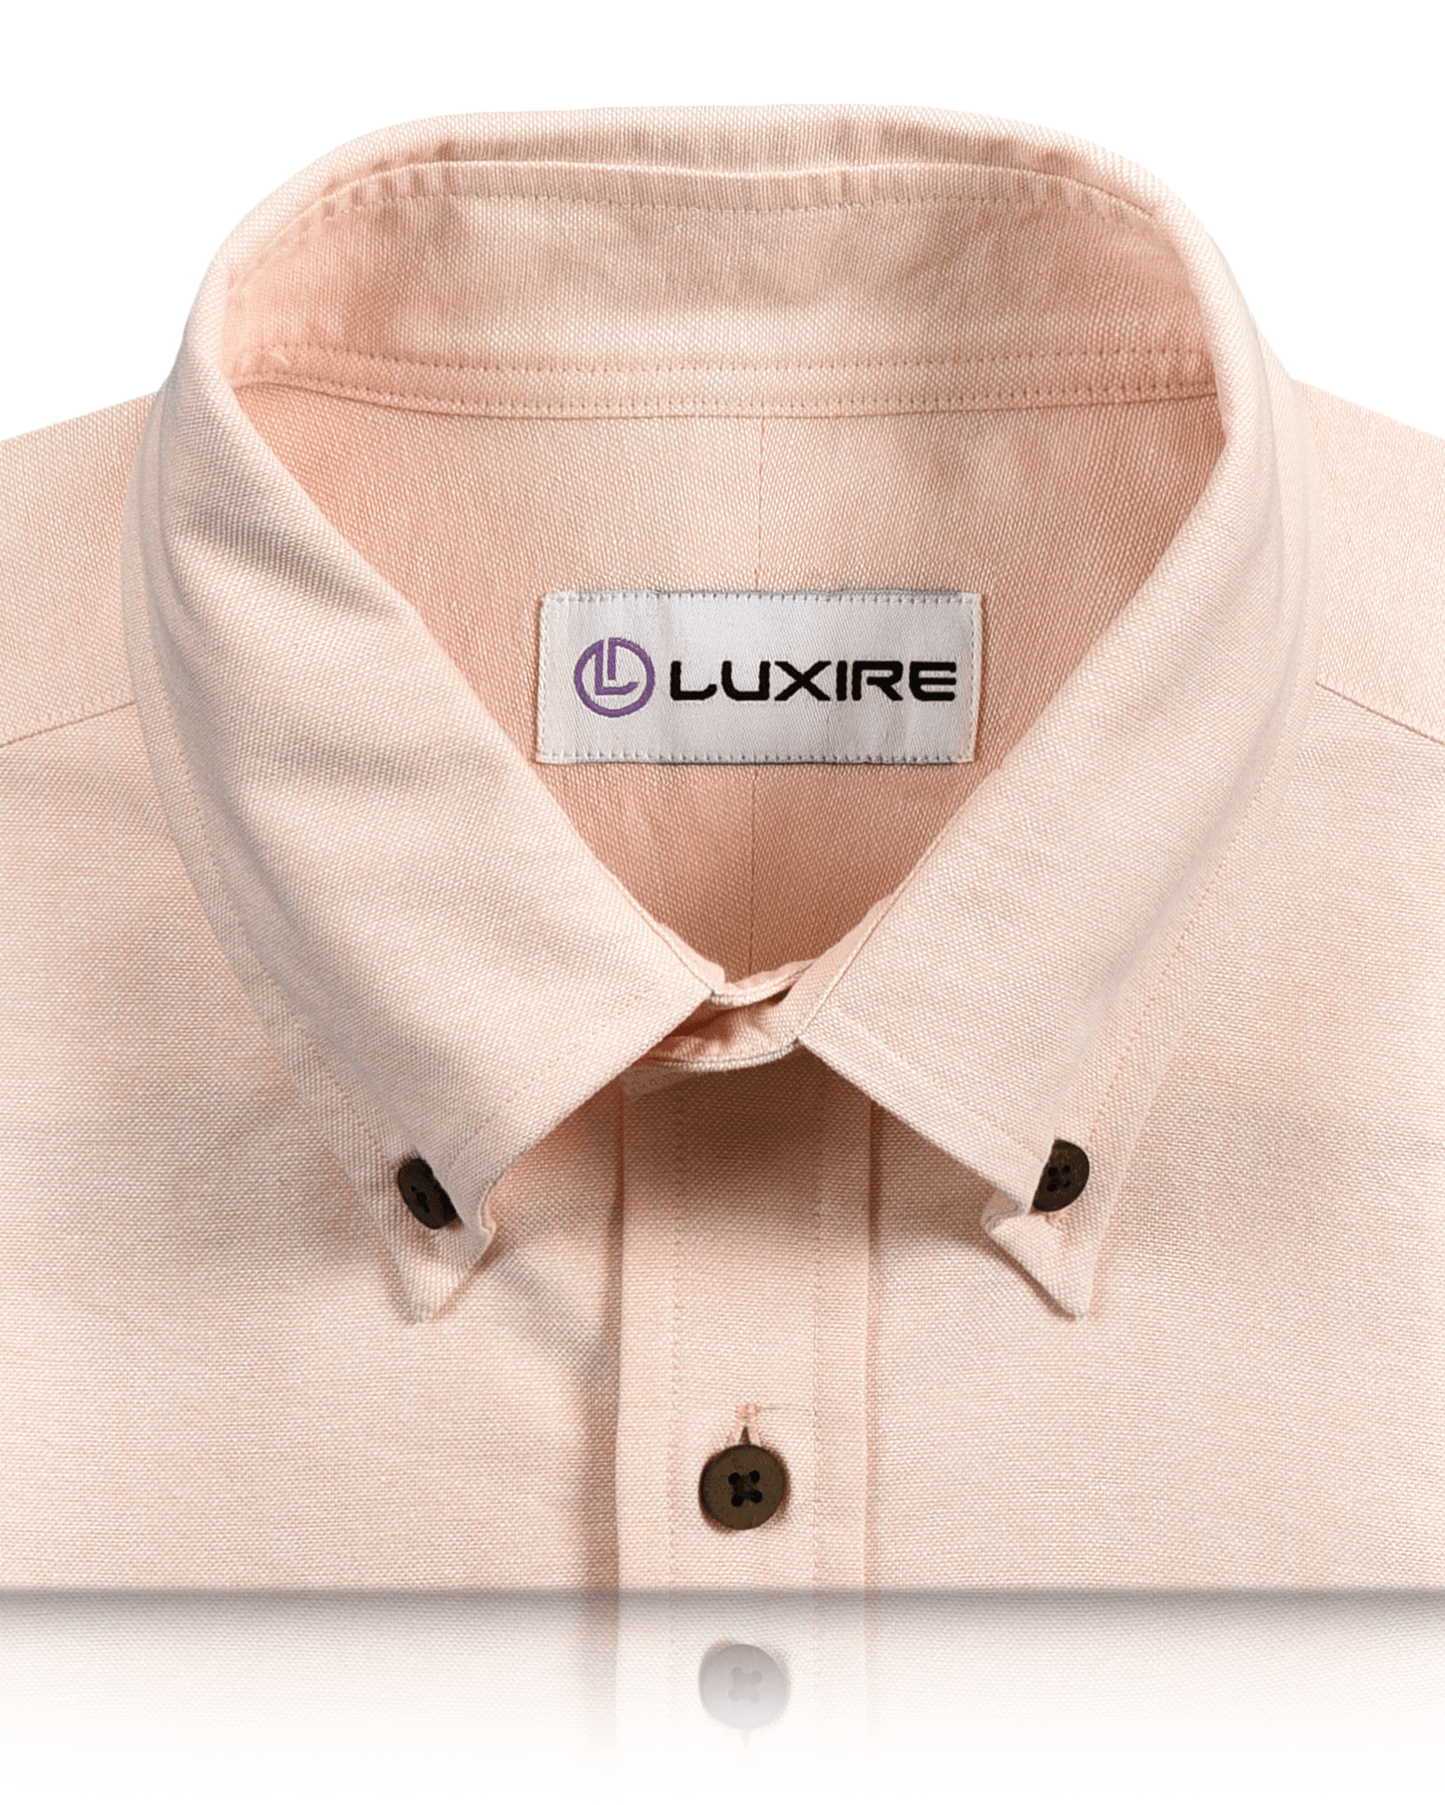 Collar of the custom oxford shirt for men by Luxire in pale orange